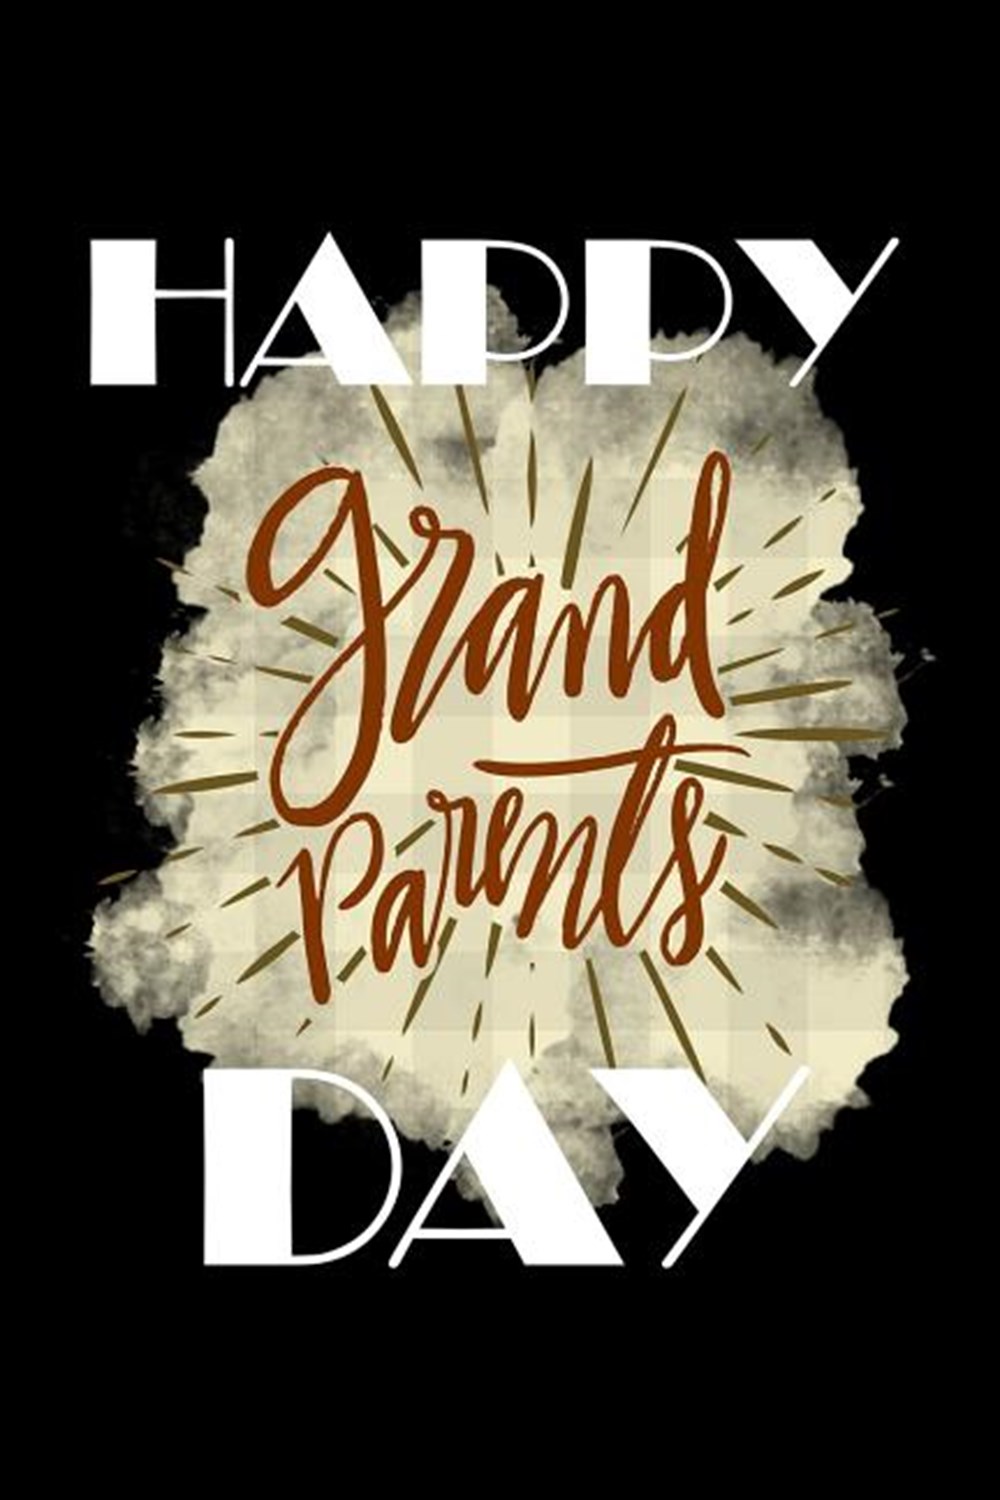 Happy Grandparents Day Blank Paper Sketch Book - Artist Sketch Pad Journal for Sketching, Doodling, 